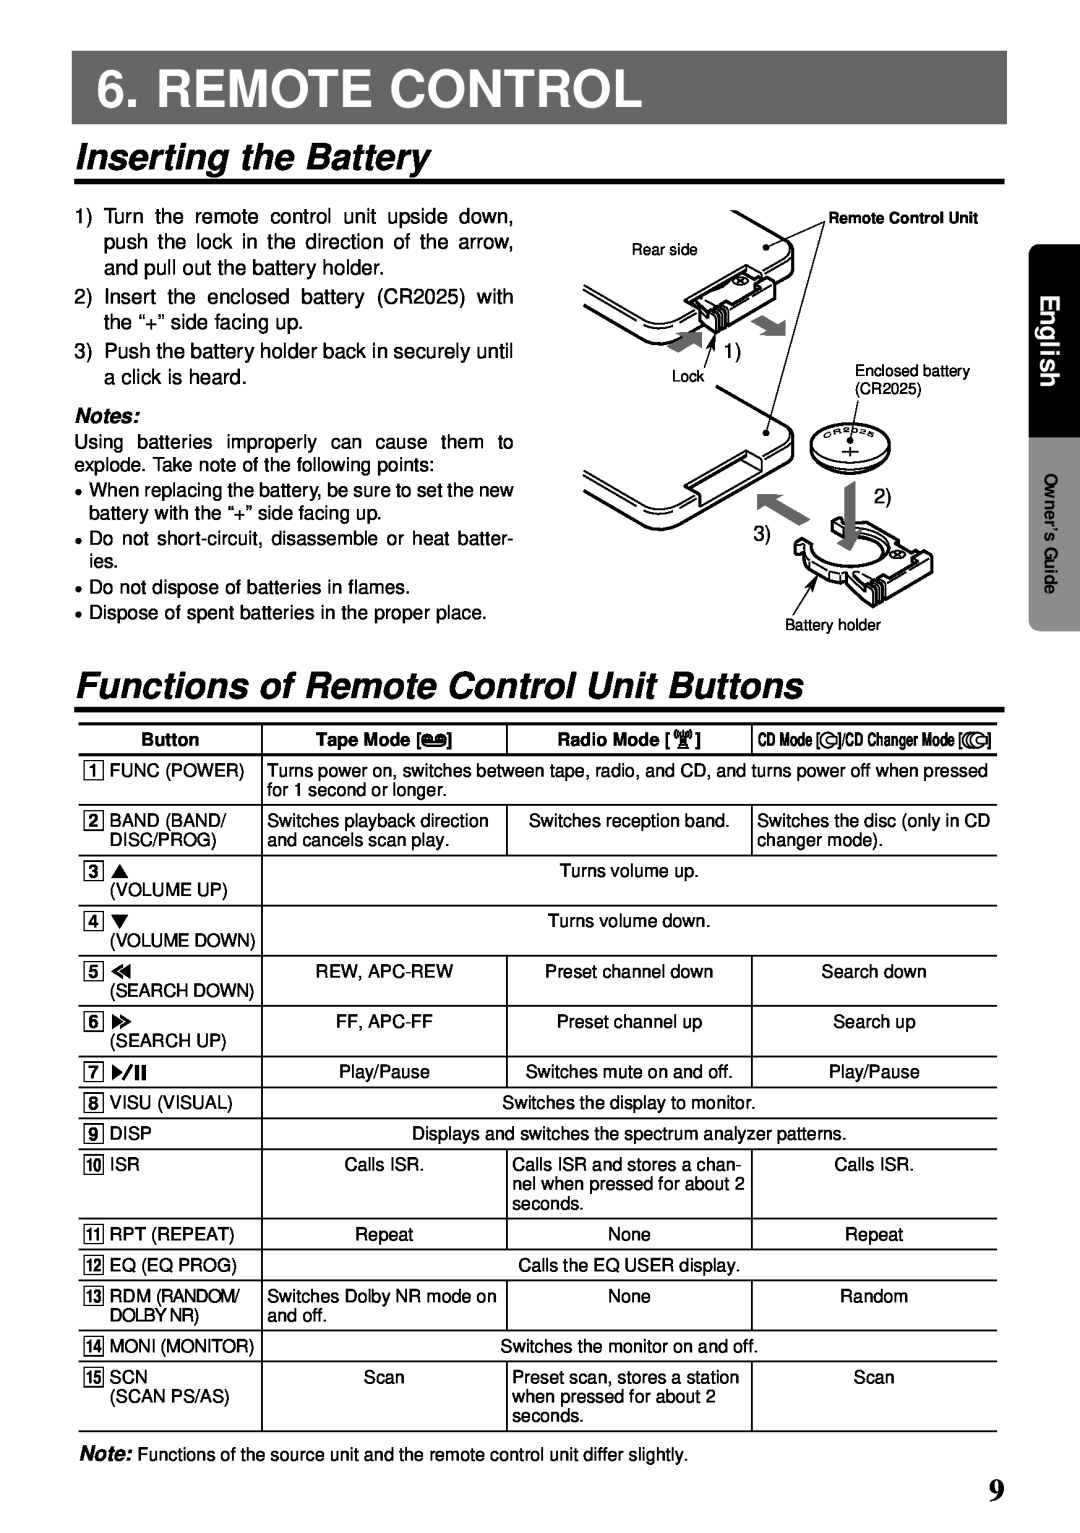 Clarion compact disc manual Inserting the Battery, Functions of Remote Control Unit Buttons, English Owner’s Guide 